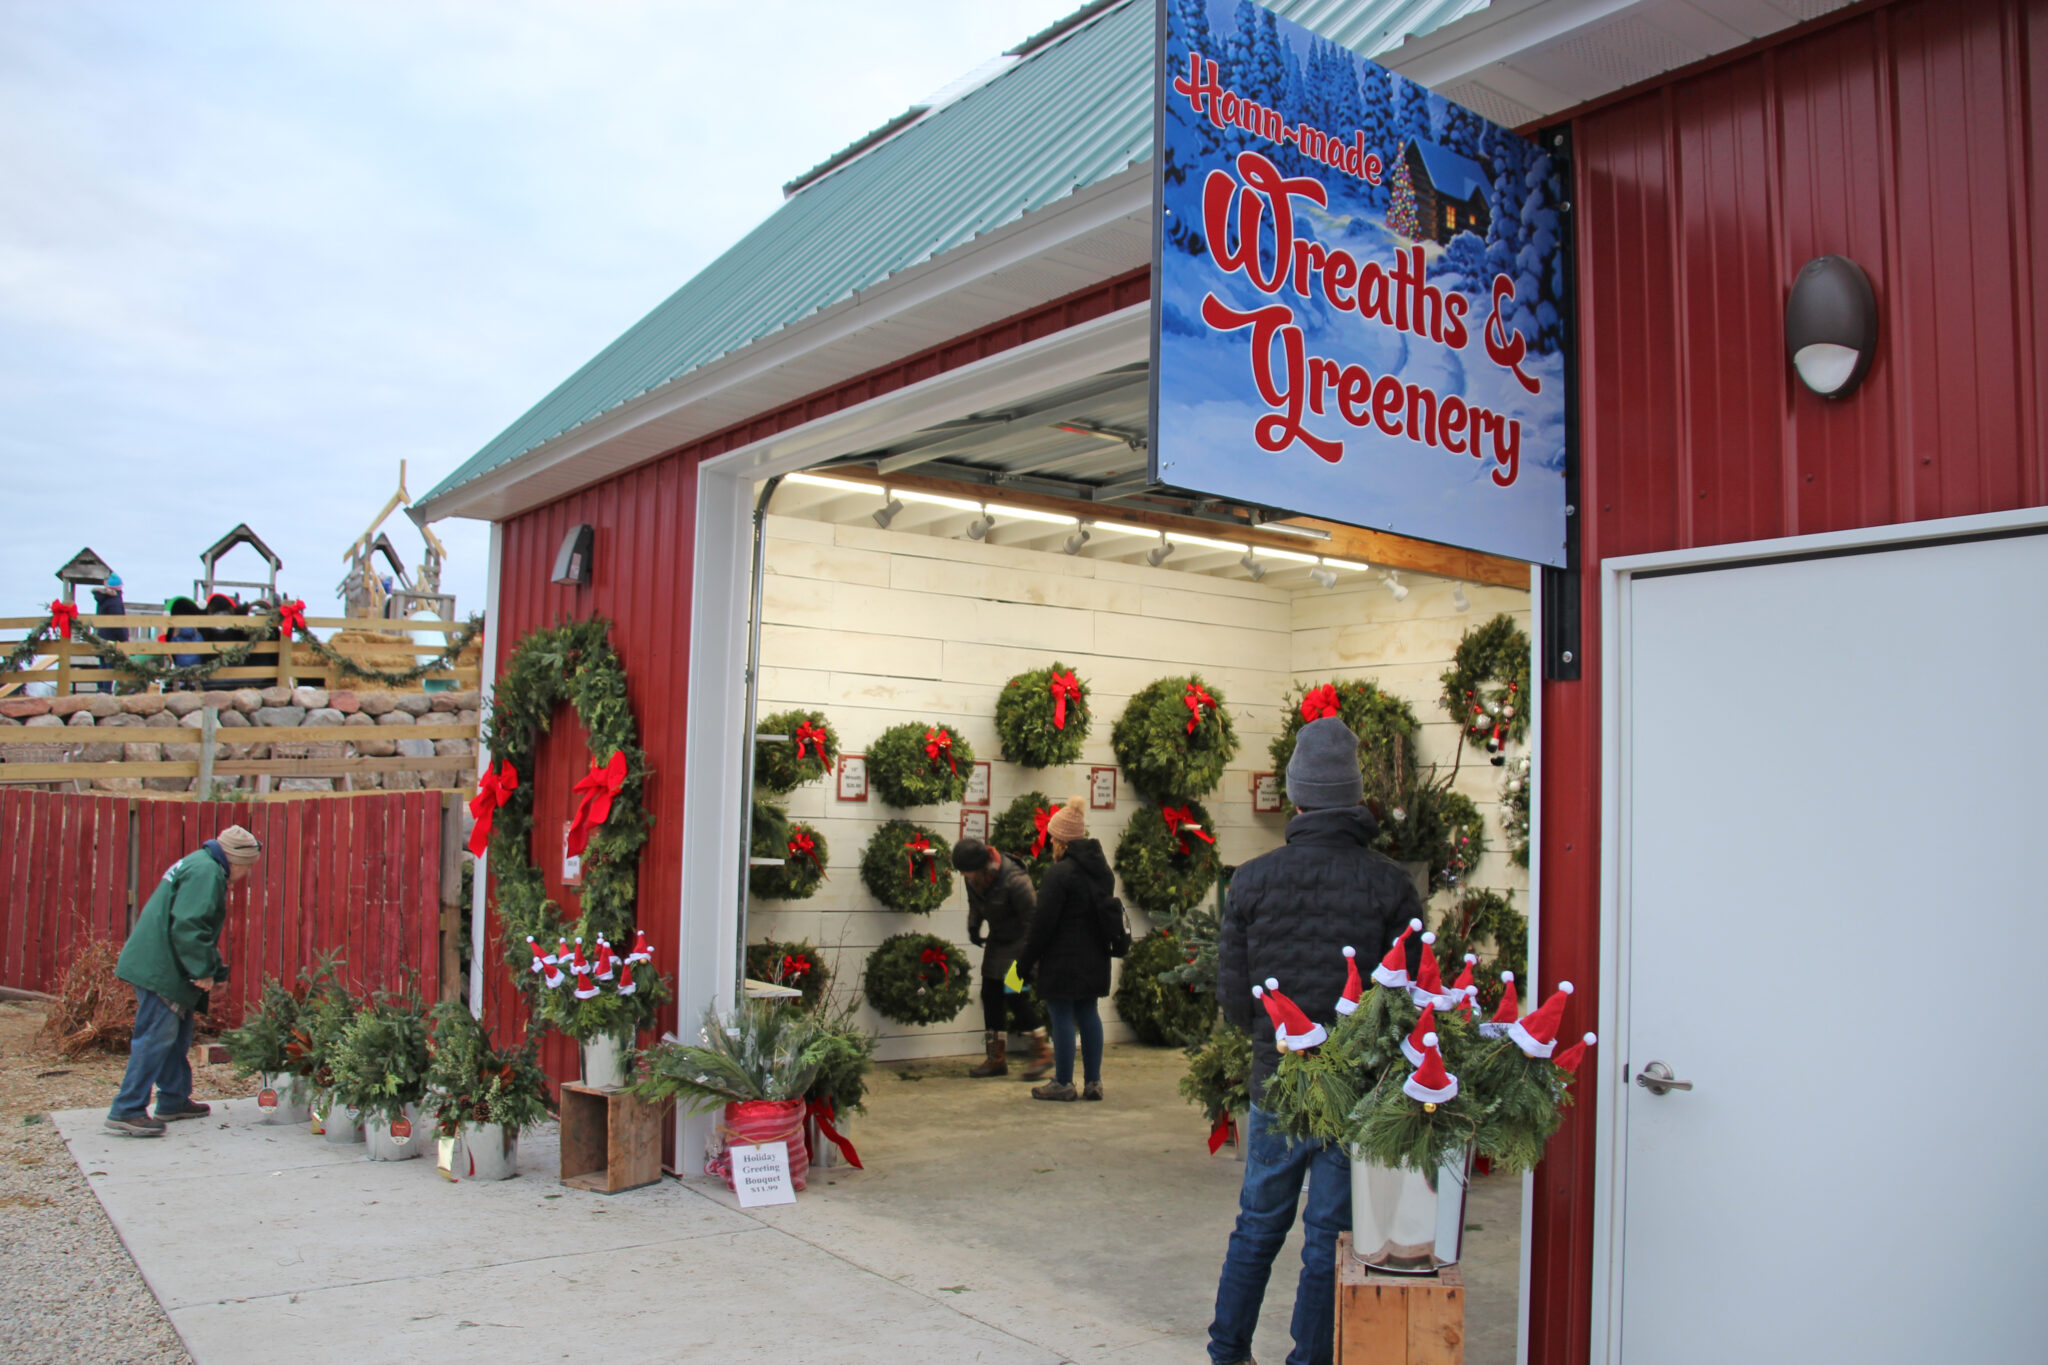 Hanns Christmas Farm – Memories of an Old Fashioned Christmas!